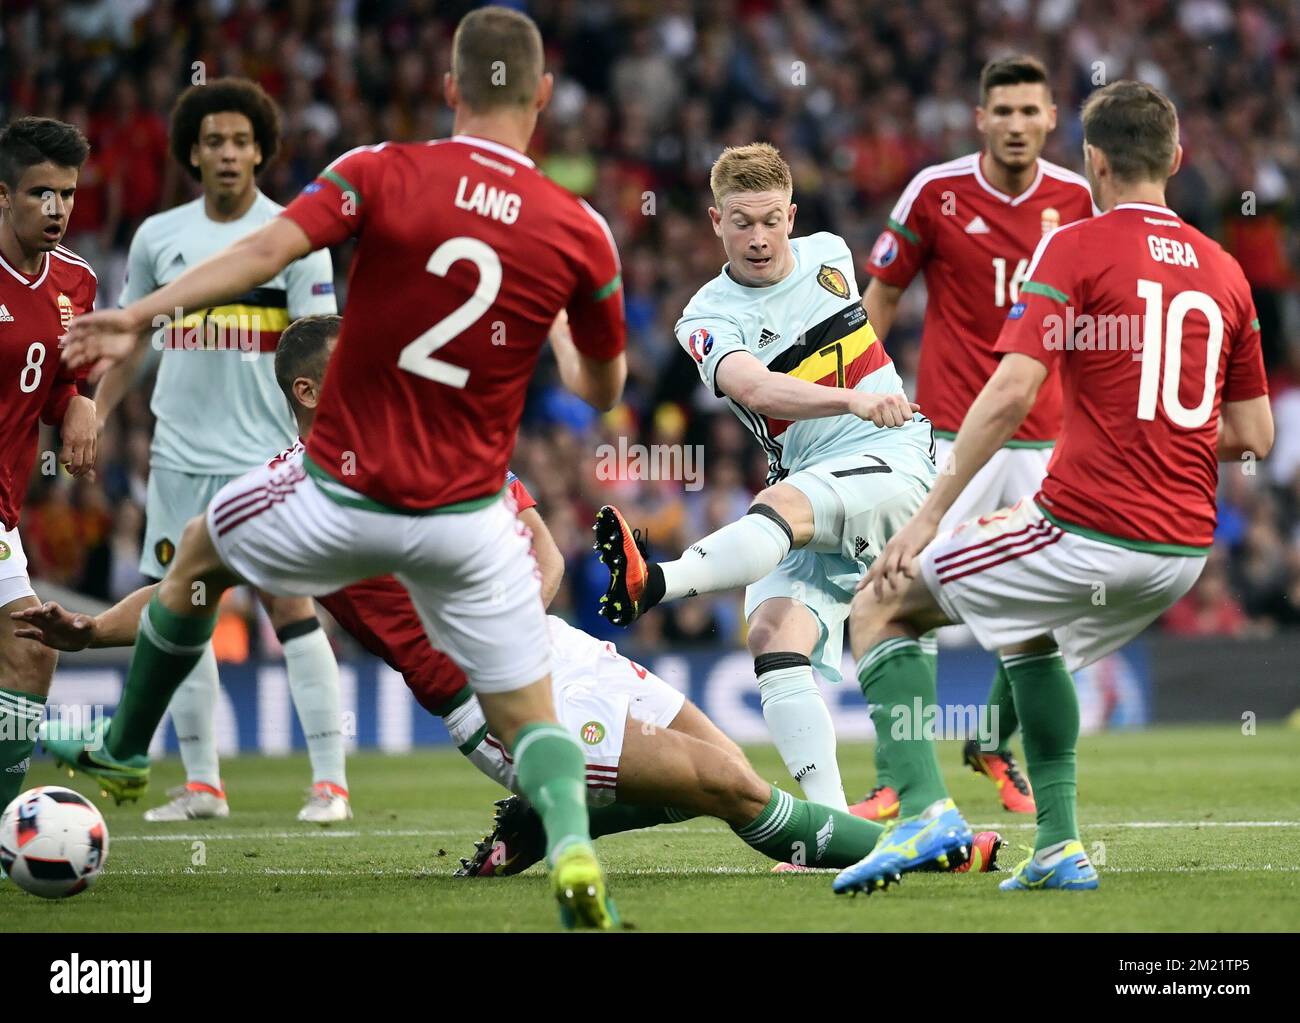 Belgium's Kevin De Bruyne kicks the ball during a soccer game between Belgian national soccer team Red Devils and Hungary, in the round of 16 of the UEFA Euro 2016 European Championships, on Sunday 26 June 2016, in Toulouse, France. The Euro2016 tournament is taking place from 10 June to 10 July. BELGA PHOTO DIRK WAEM Stock Photo